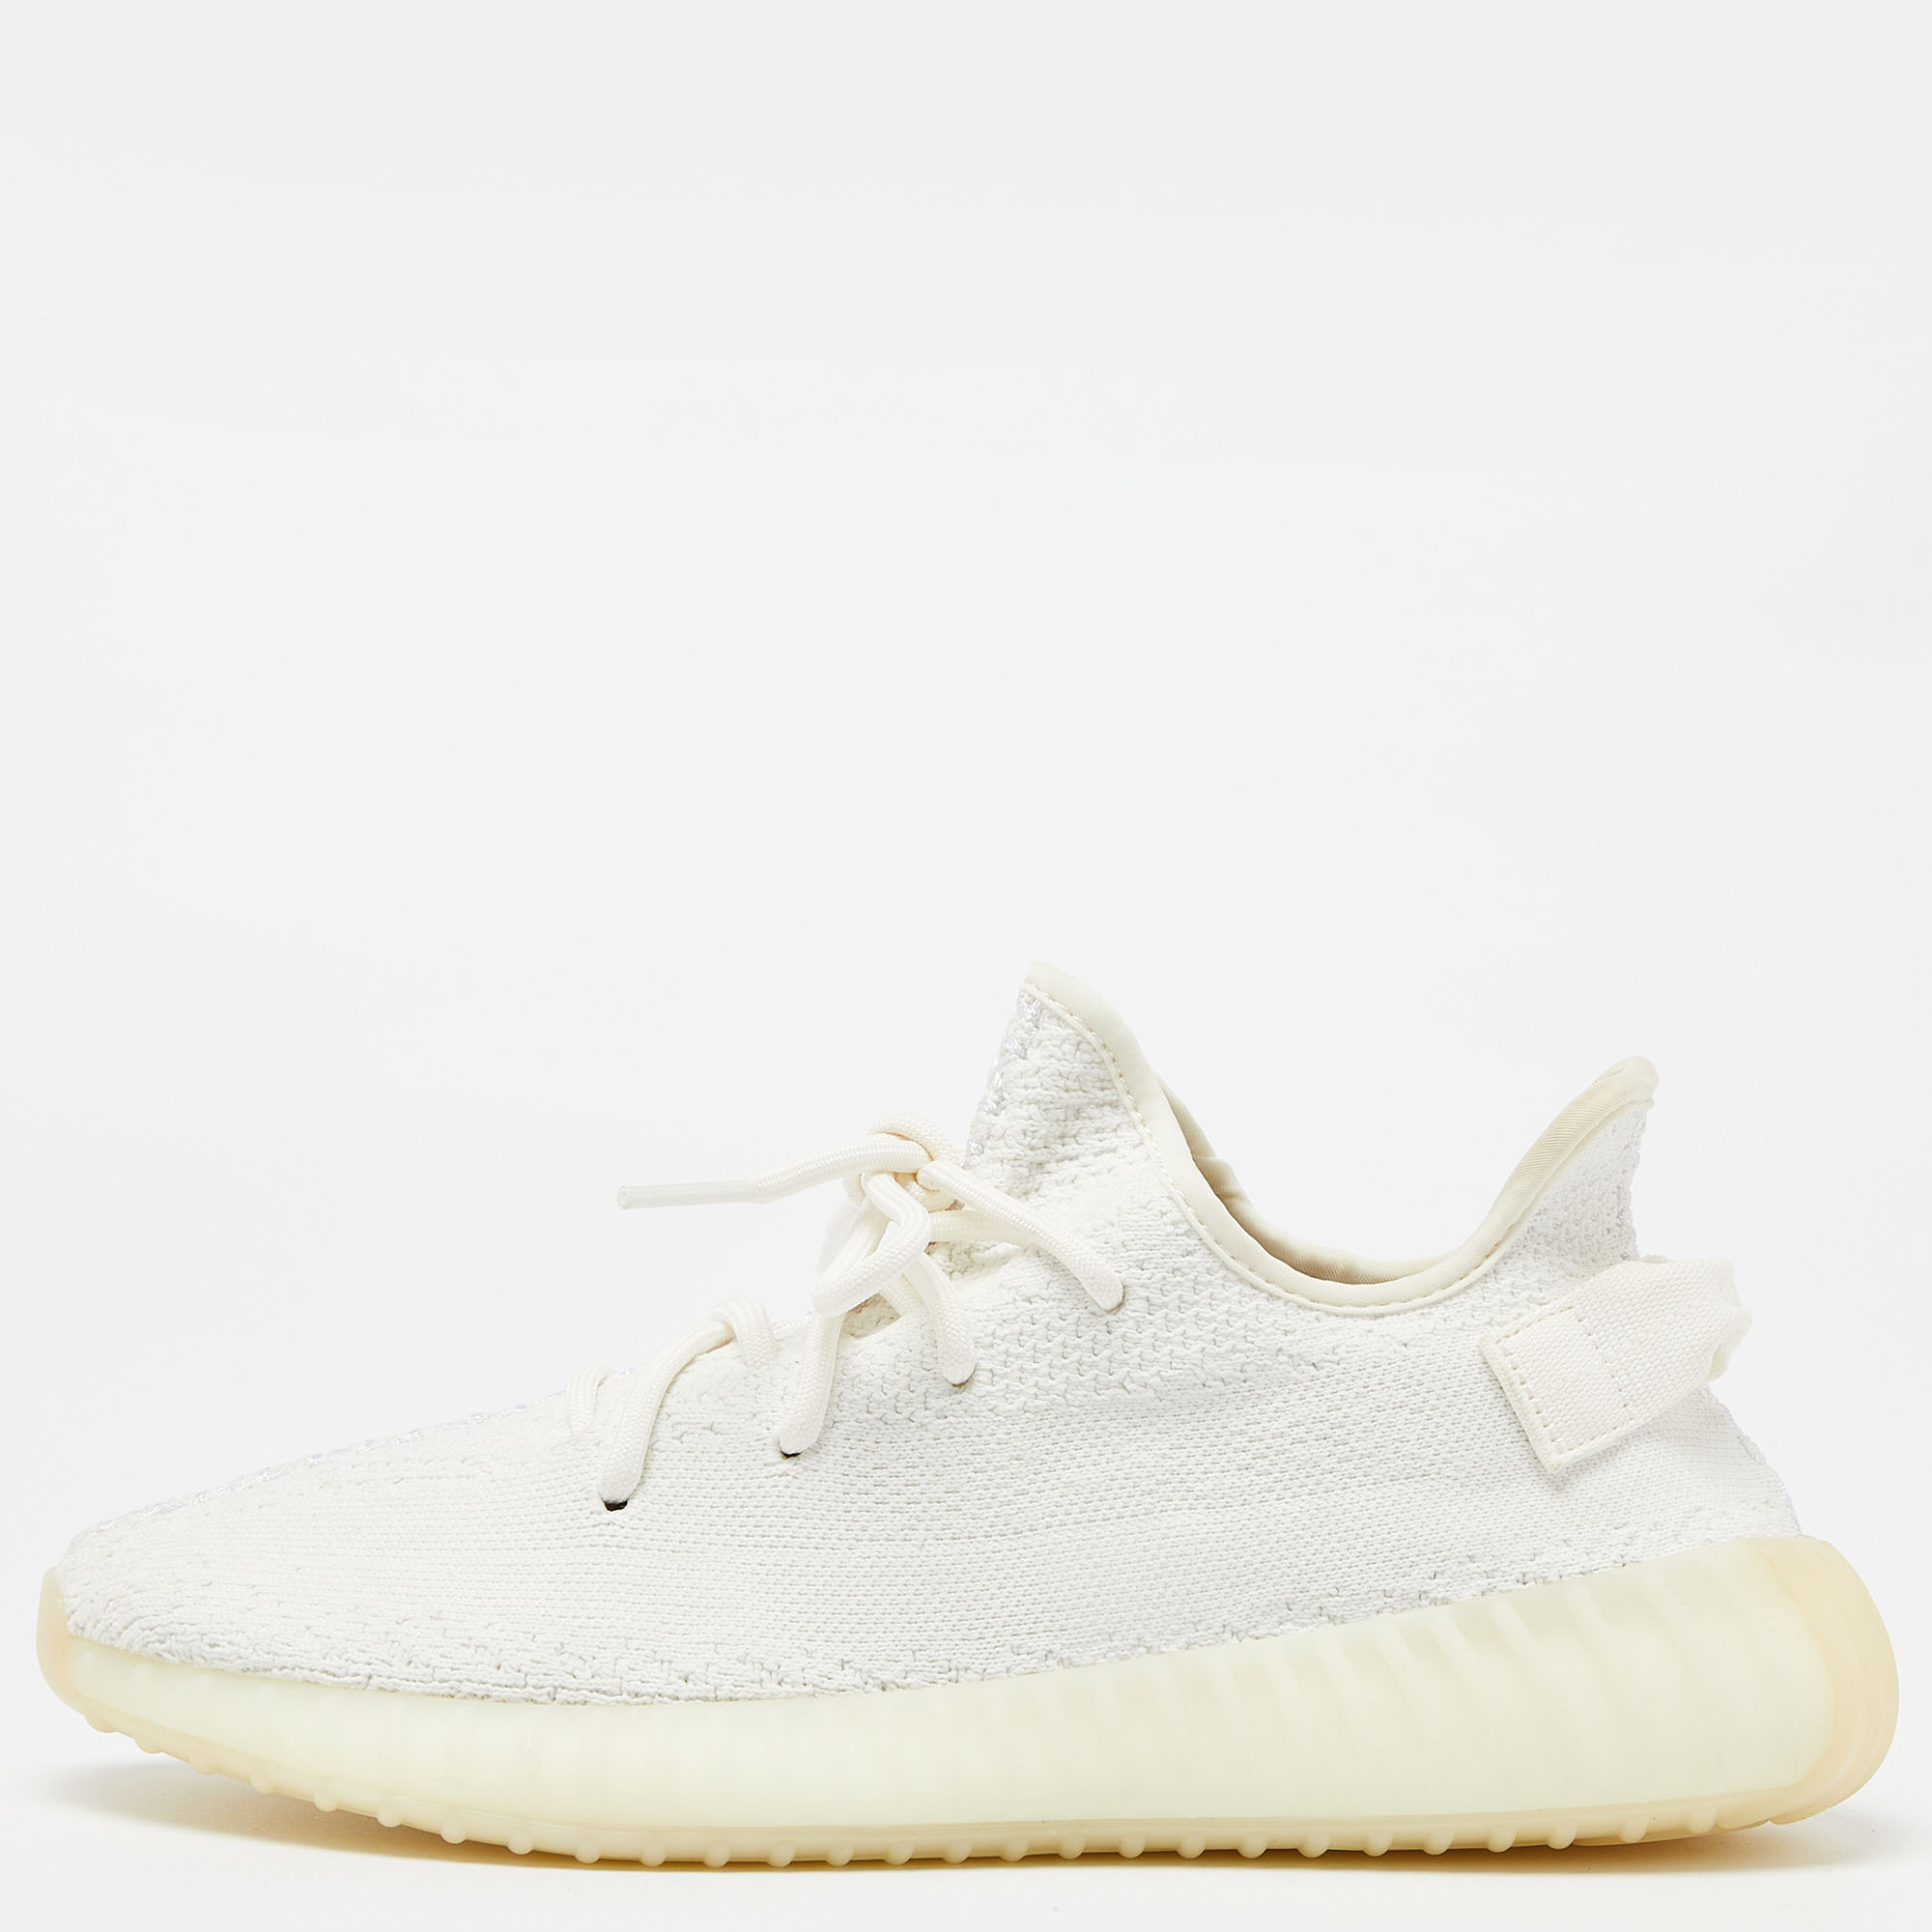 

Yeezy x Adidas White Knit Fabric Boost 350 V2 Cream Sneakers Size 42 2/3